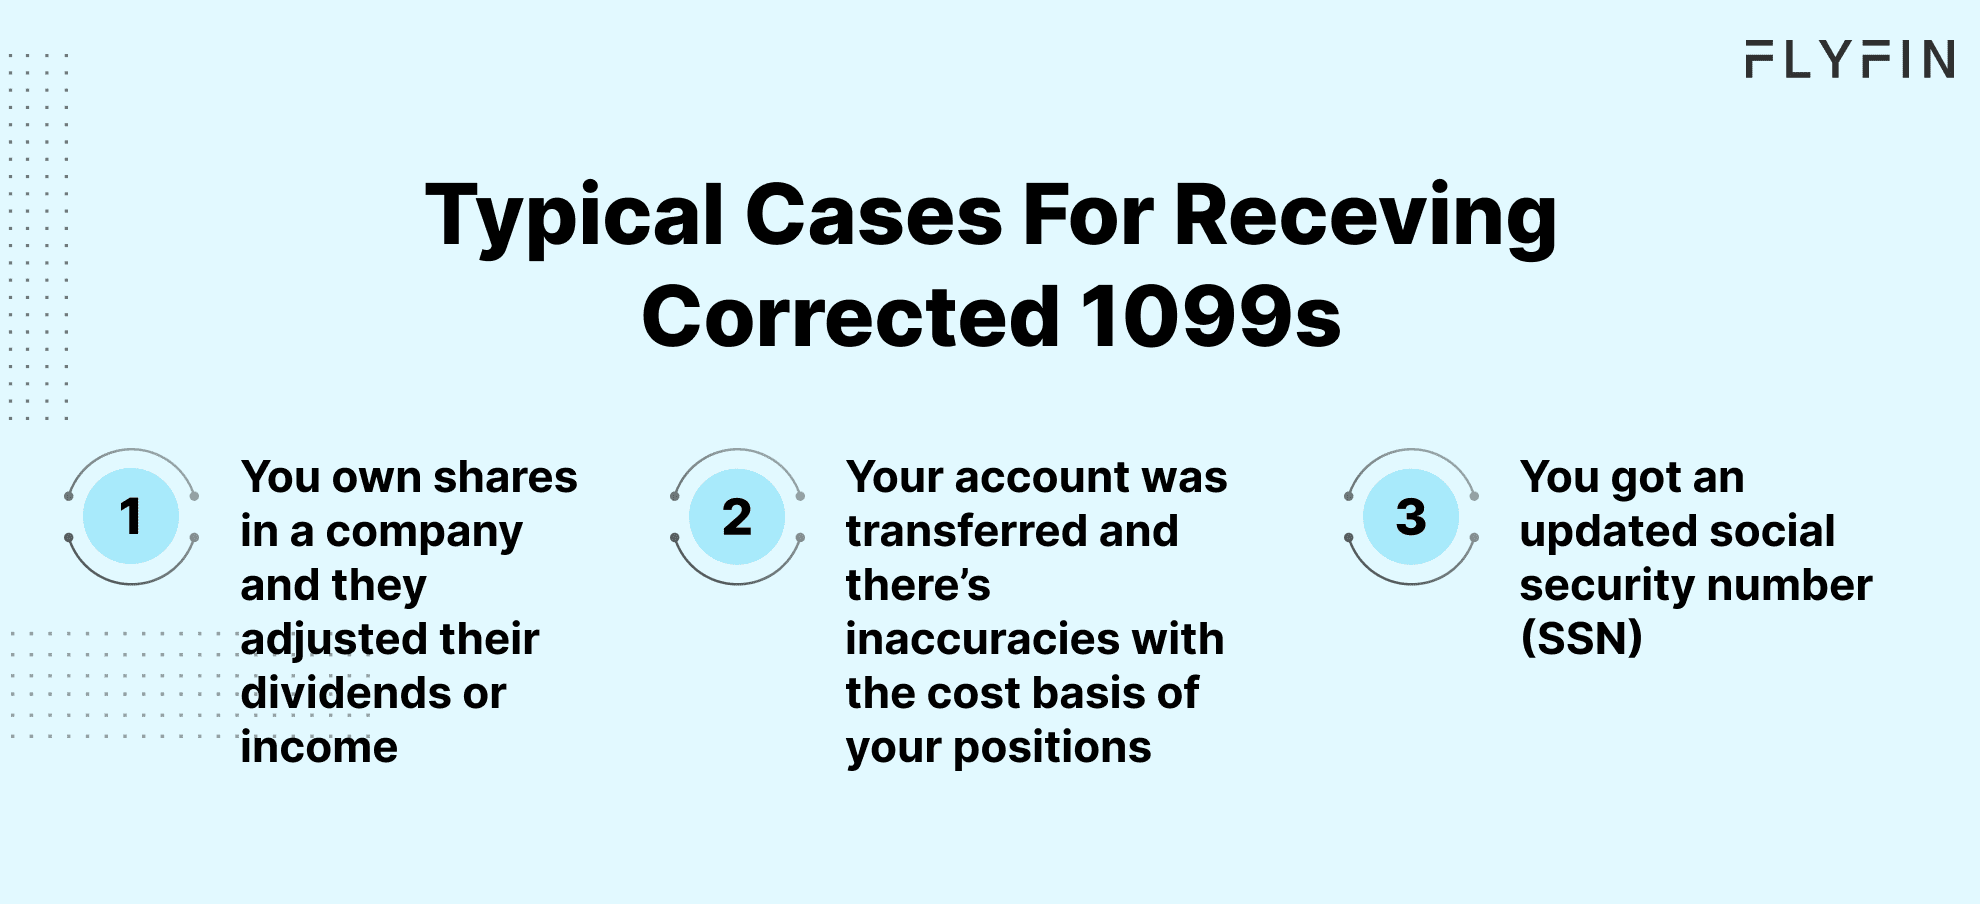 Image with text "Typical Cases for Receiving Corrected 1099s: Adjusted Dividends, Inaccurate Cost Basis, Updated SSN" for tax purposes.